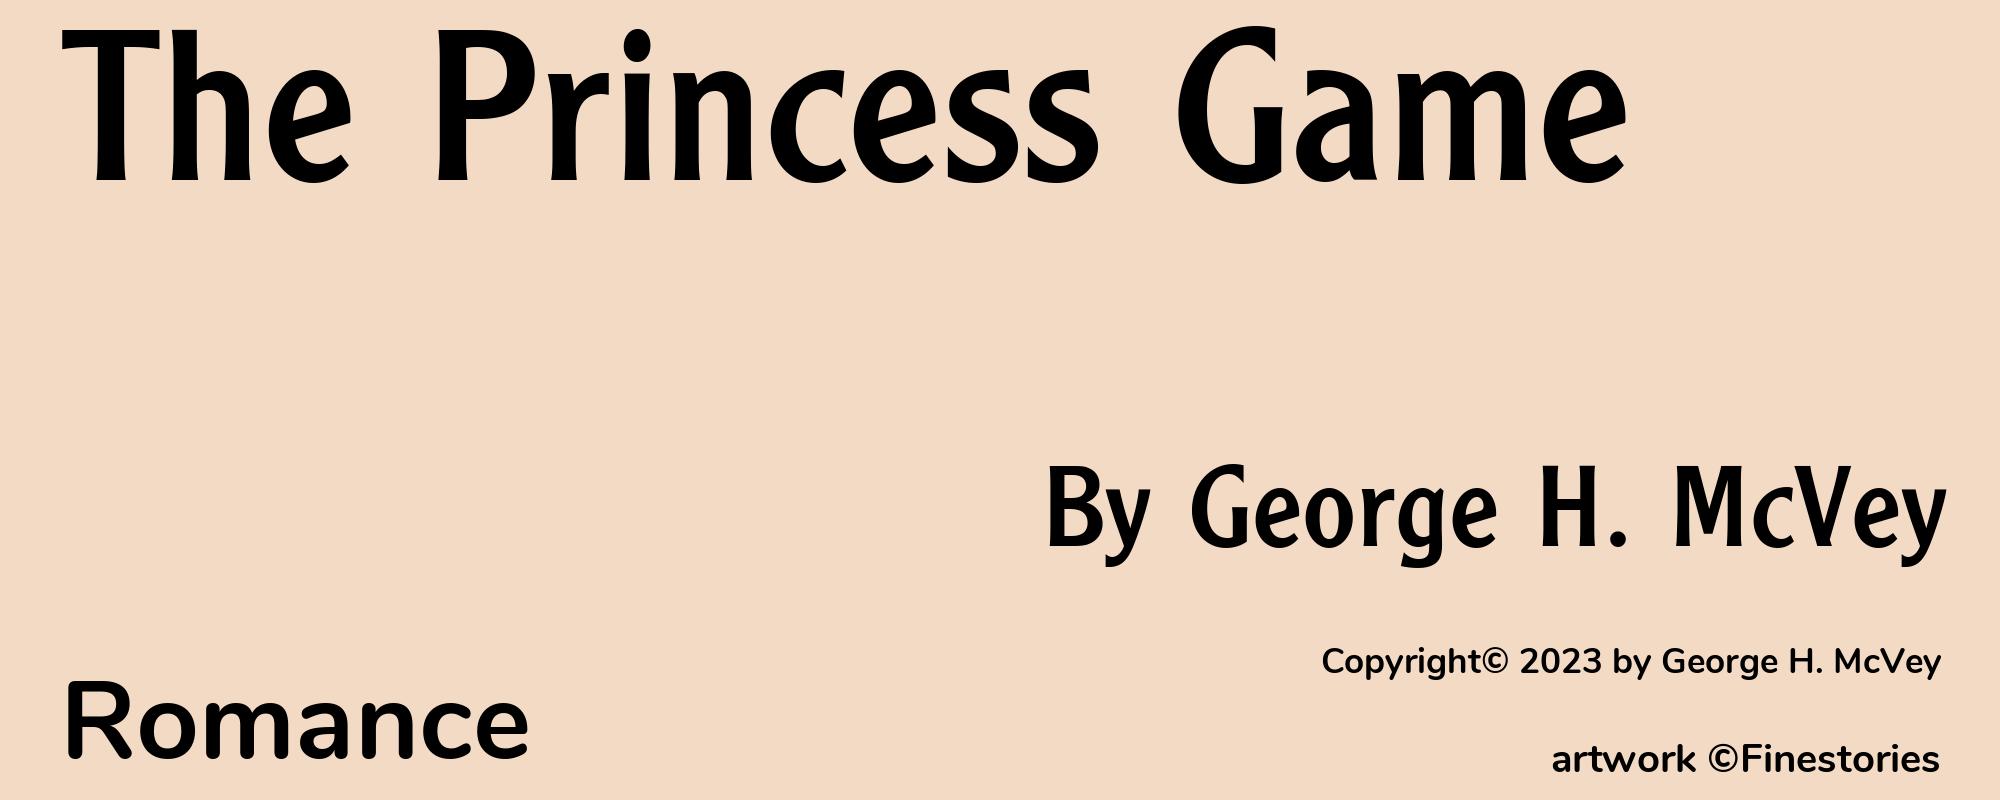 The Princess Game - Cover